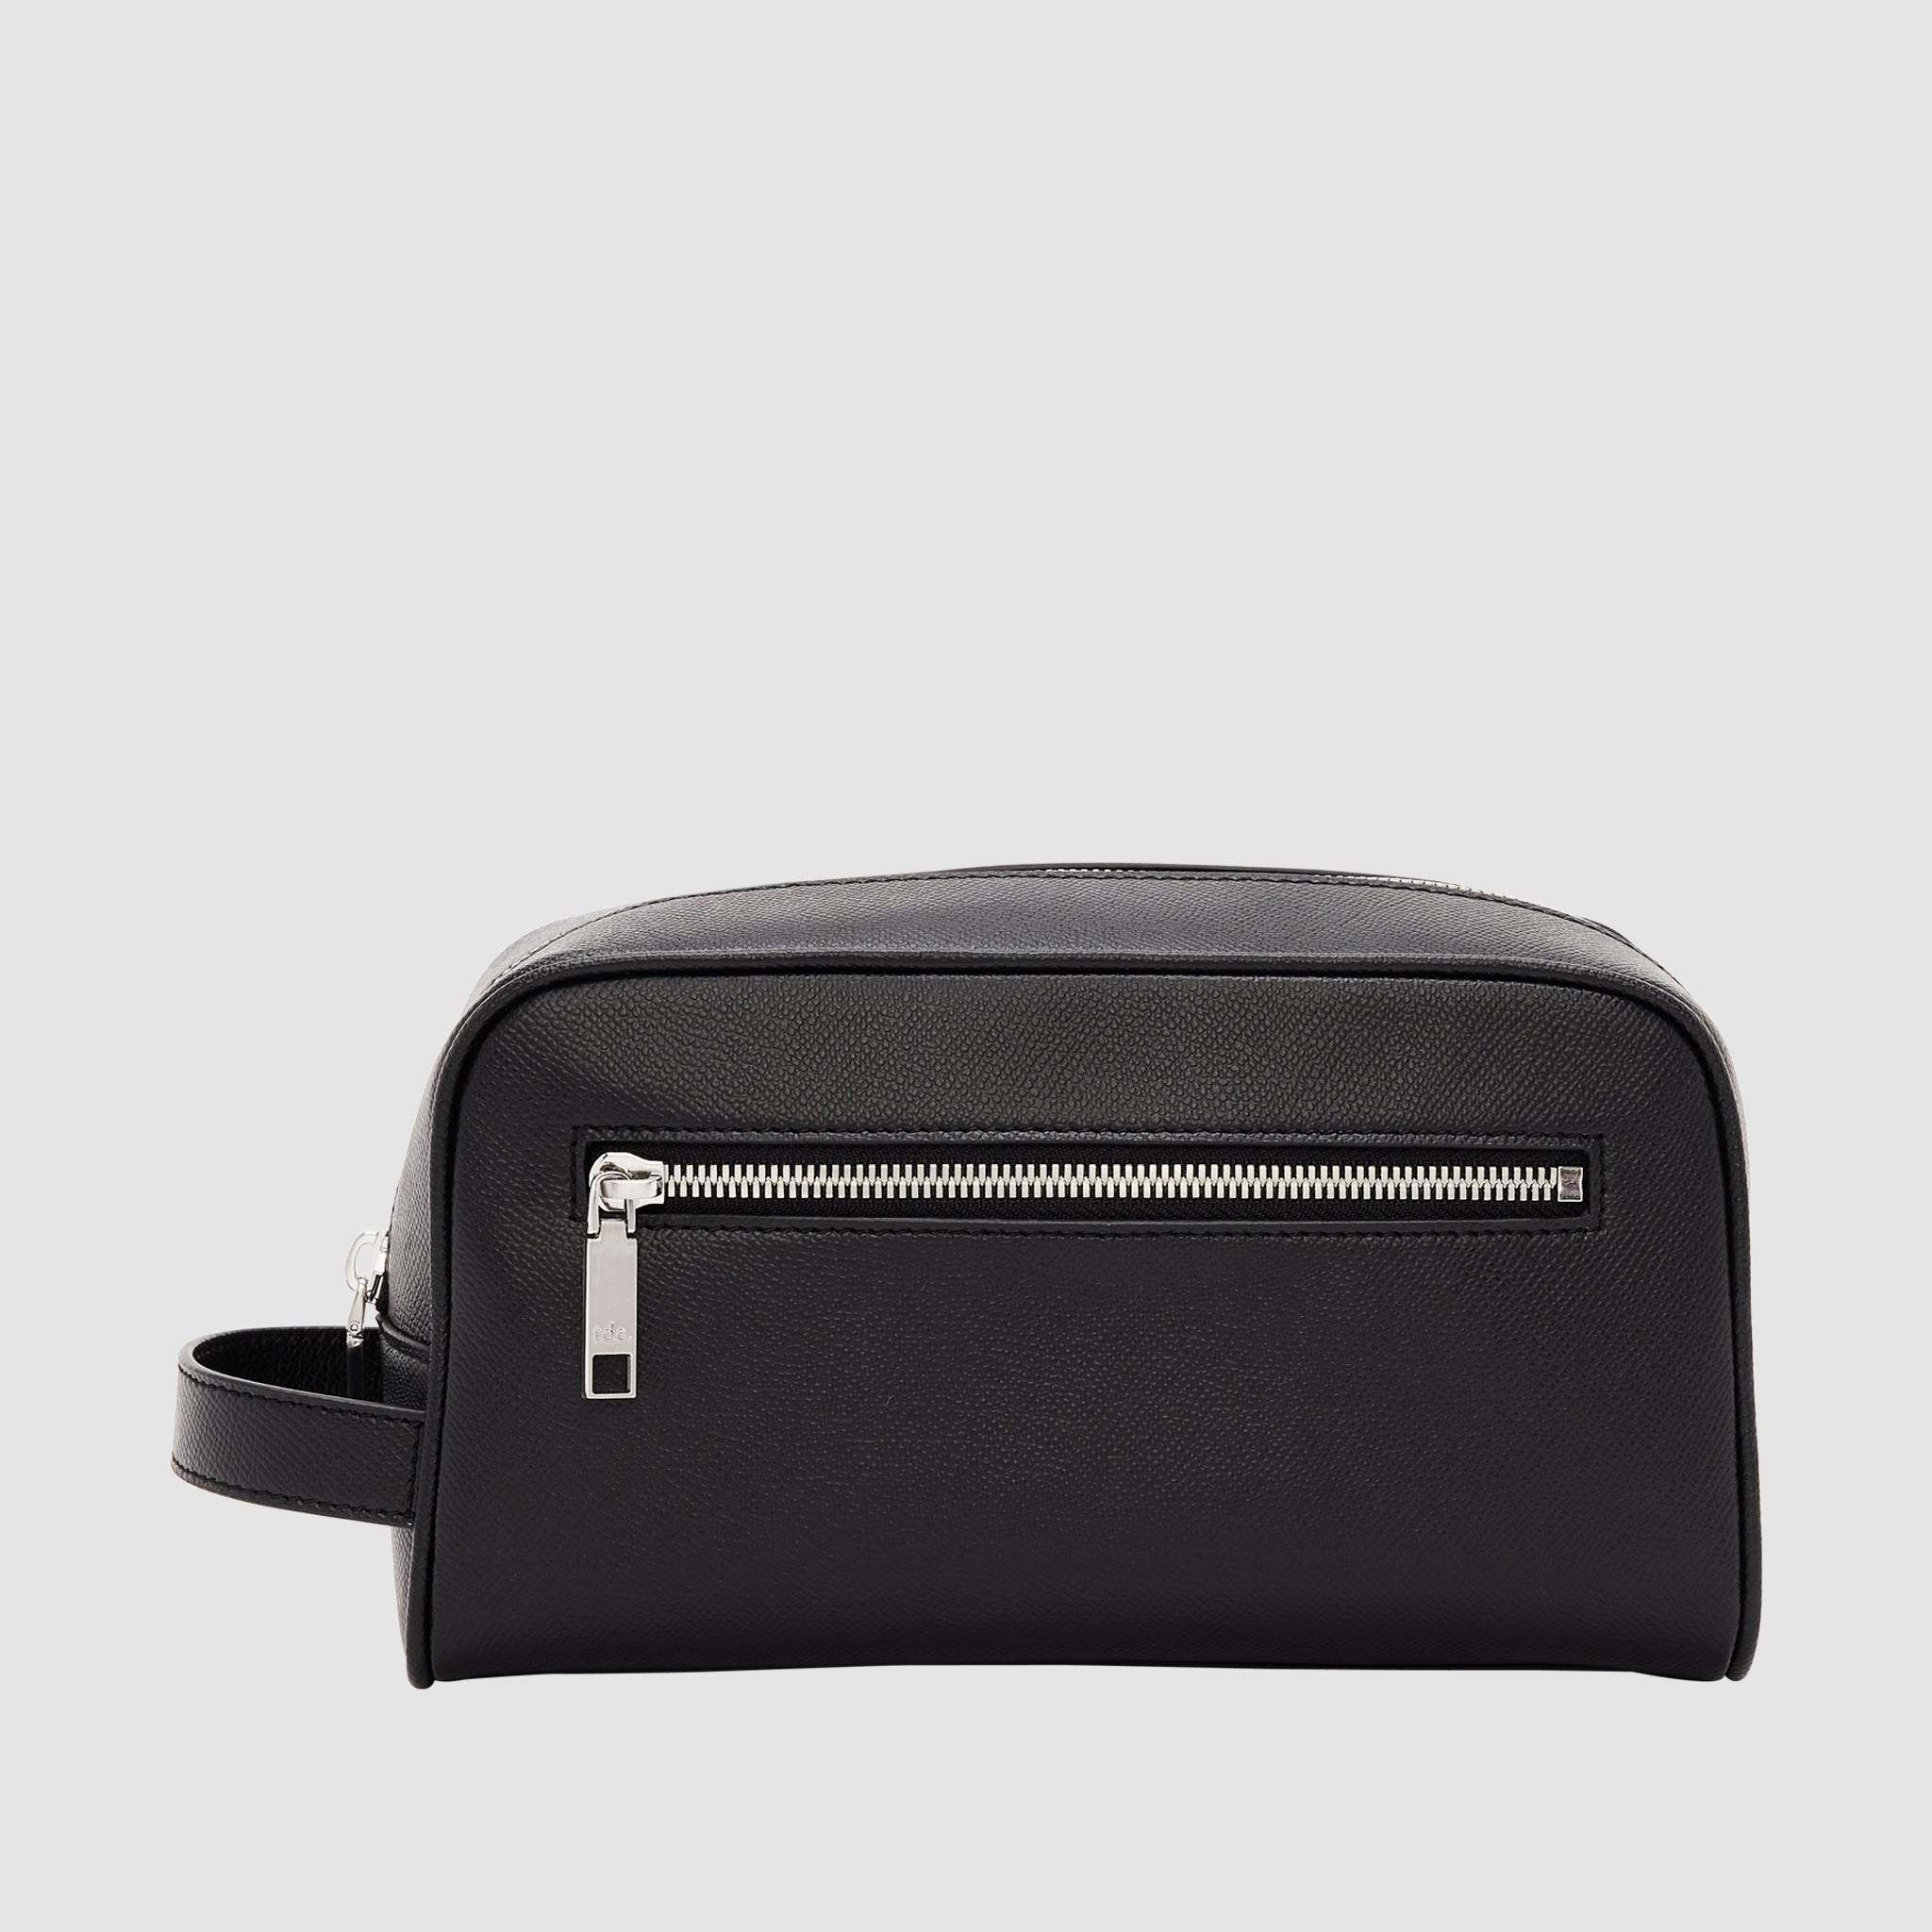 Essential Classic Luggage Tag Recycled Saffiano Black – The Daily